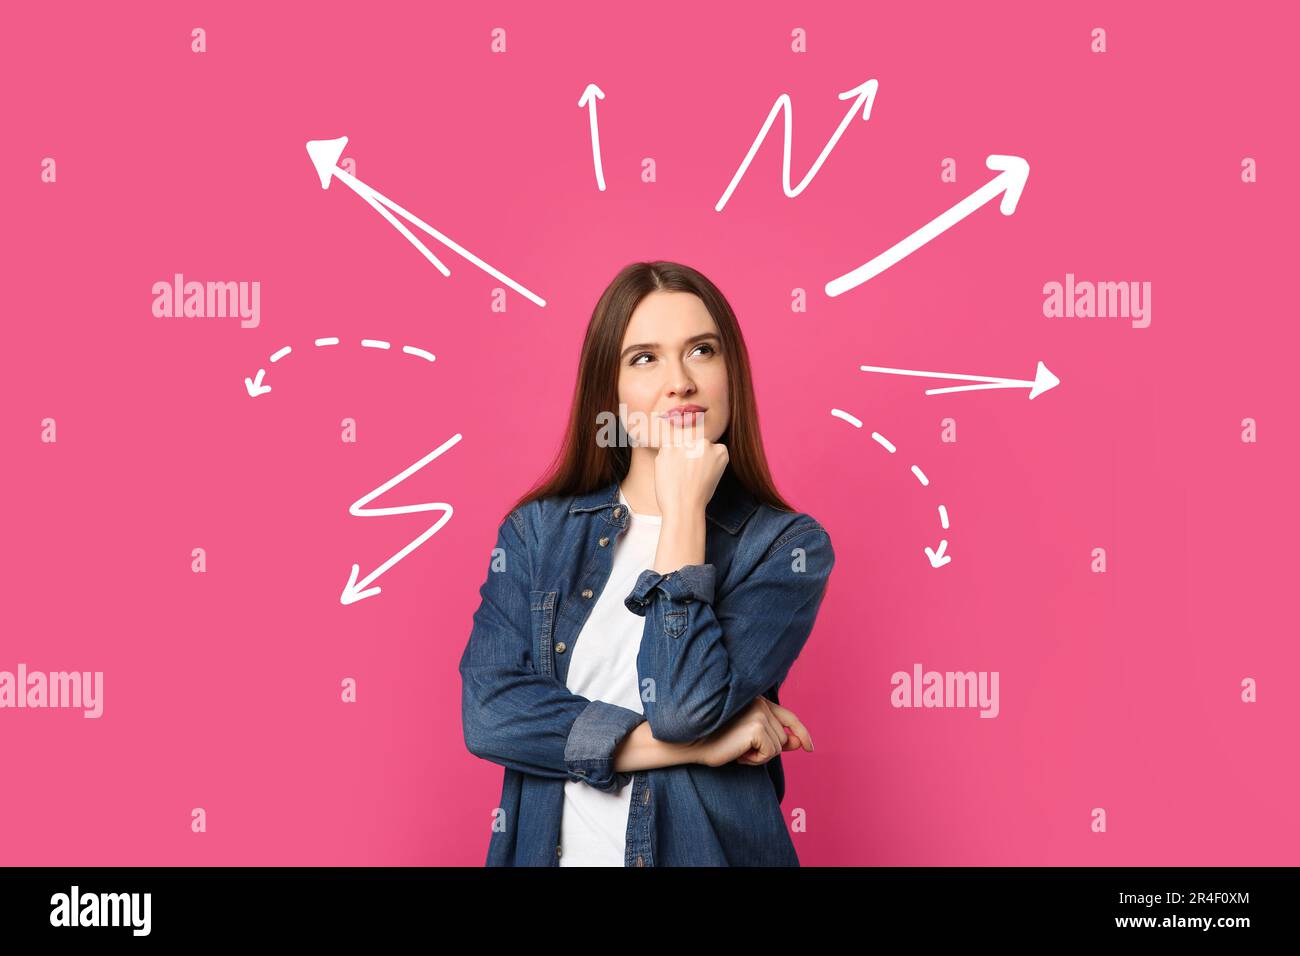 Choice in profession or other areas of life, concept. Making decision, thoughtful young woman surrounded by drawn arrows on pink background Stock Photo